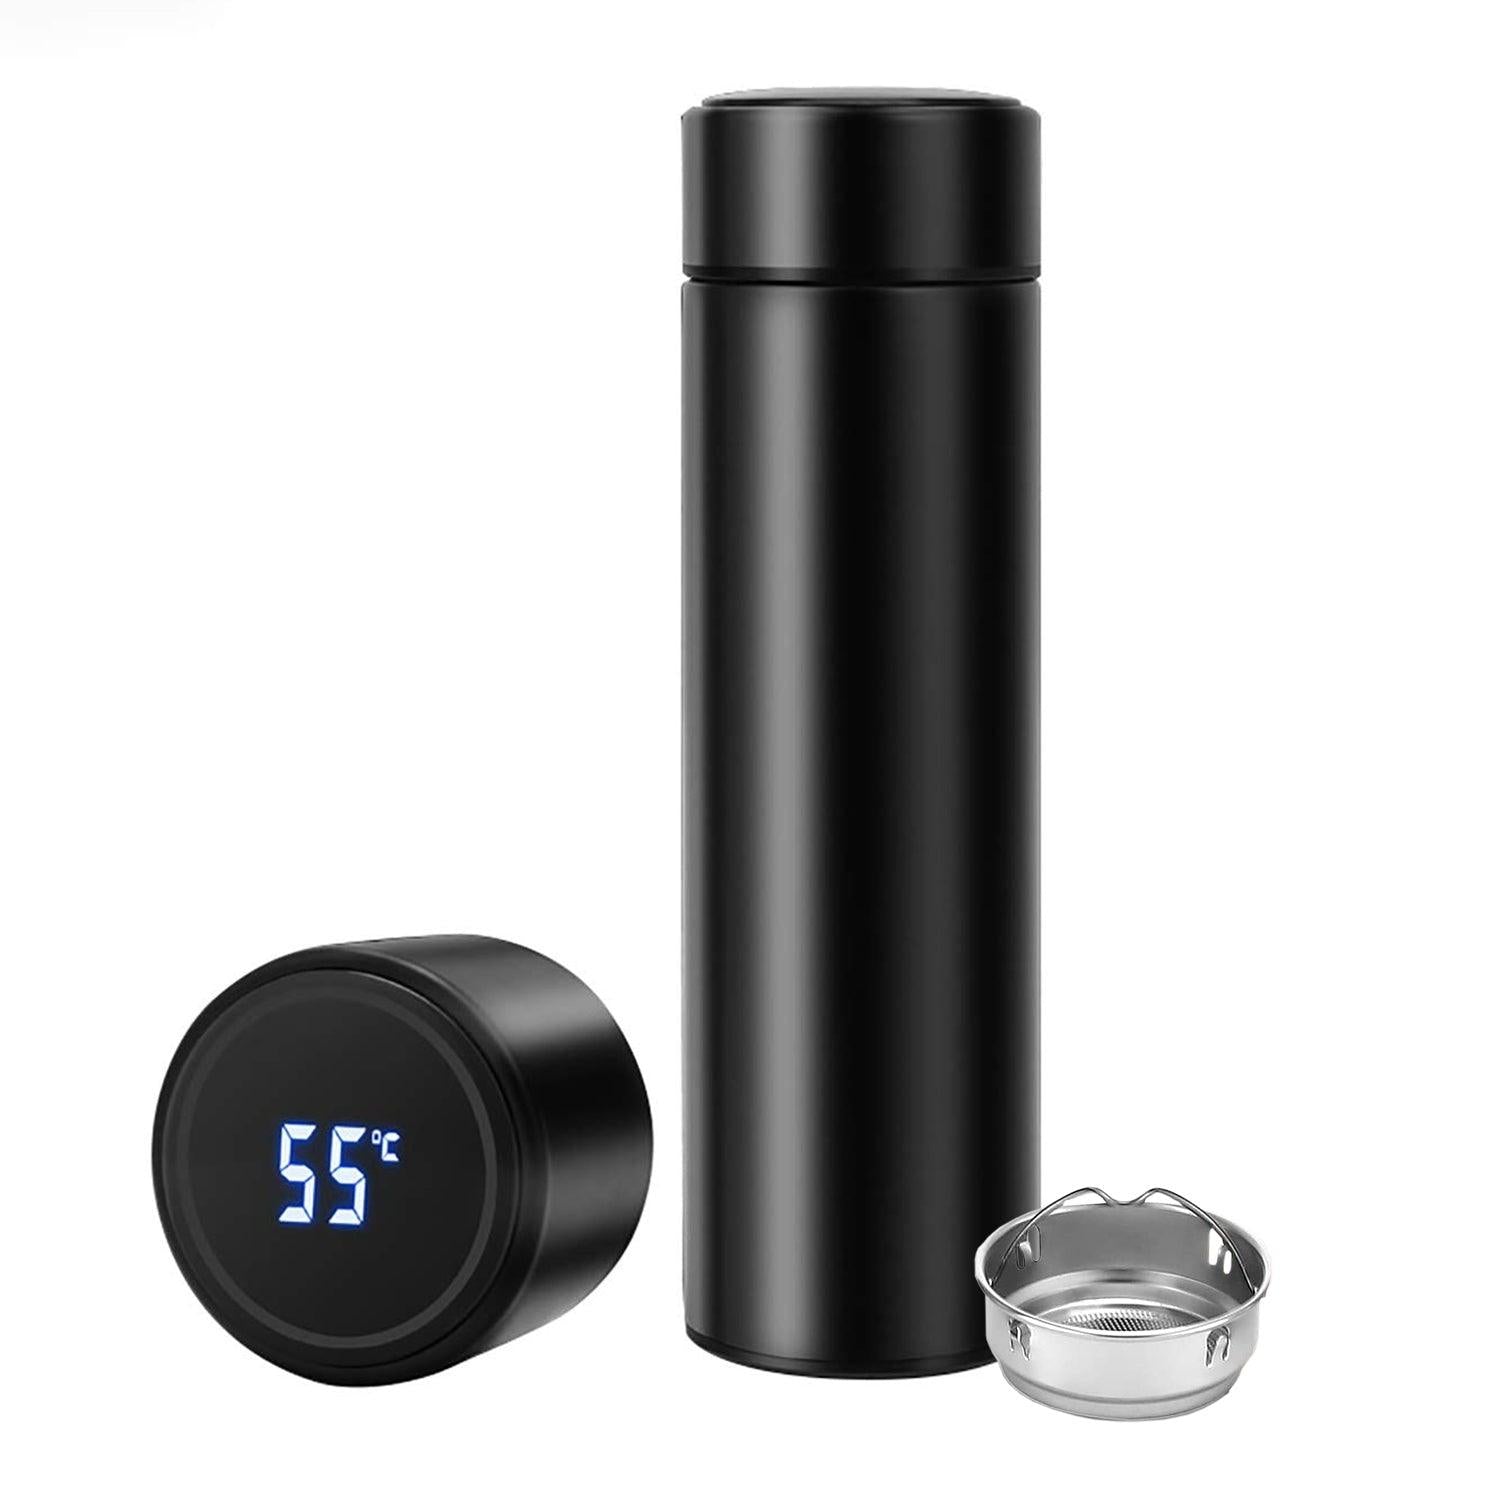 Smart Water Bottle with LED Temperature Display 500ml - TruVeli